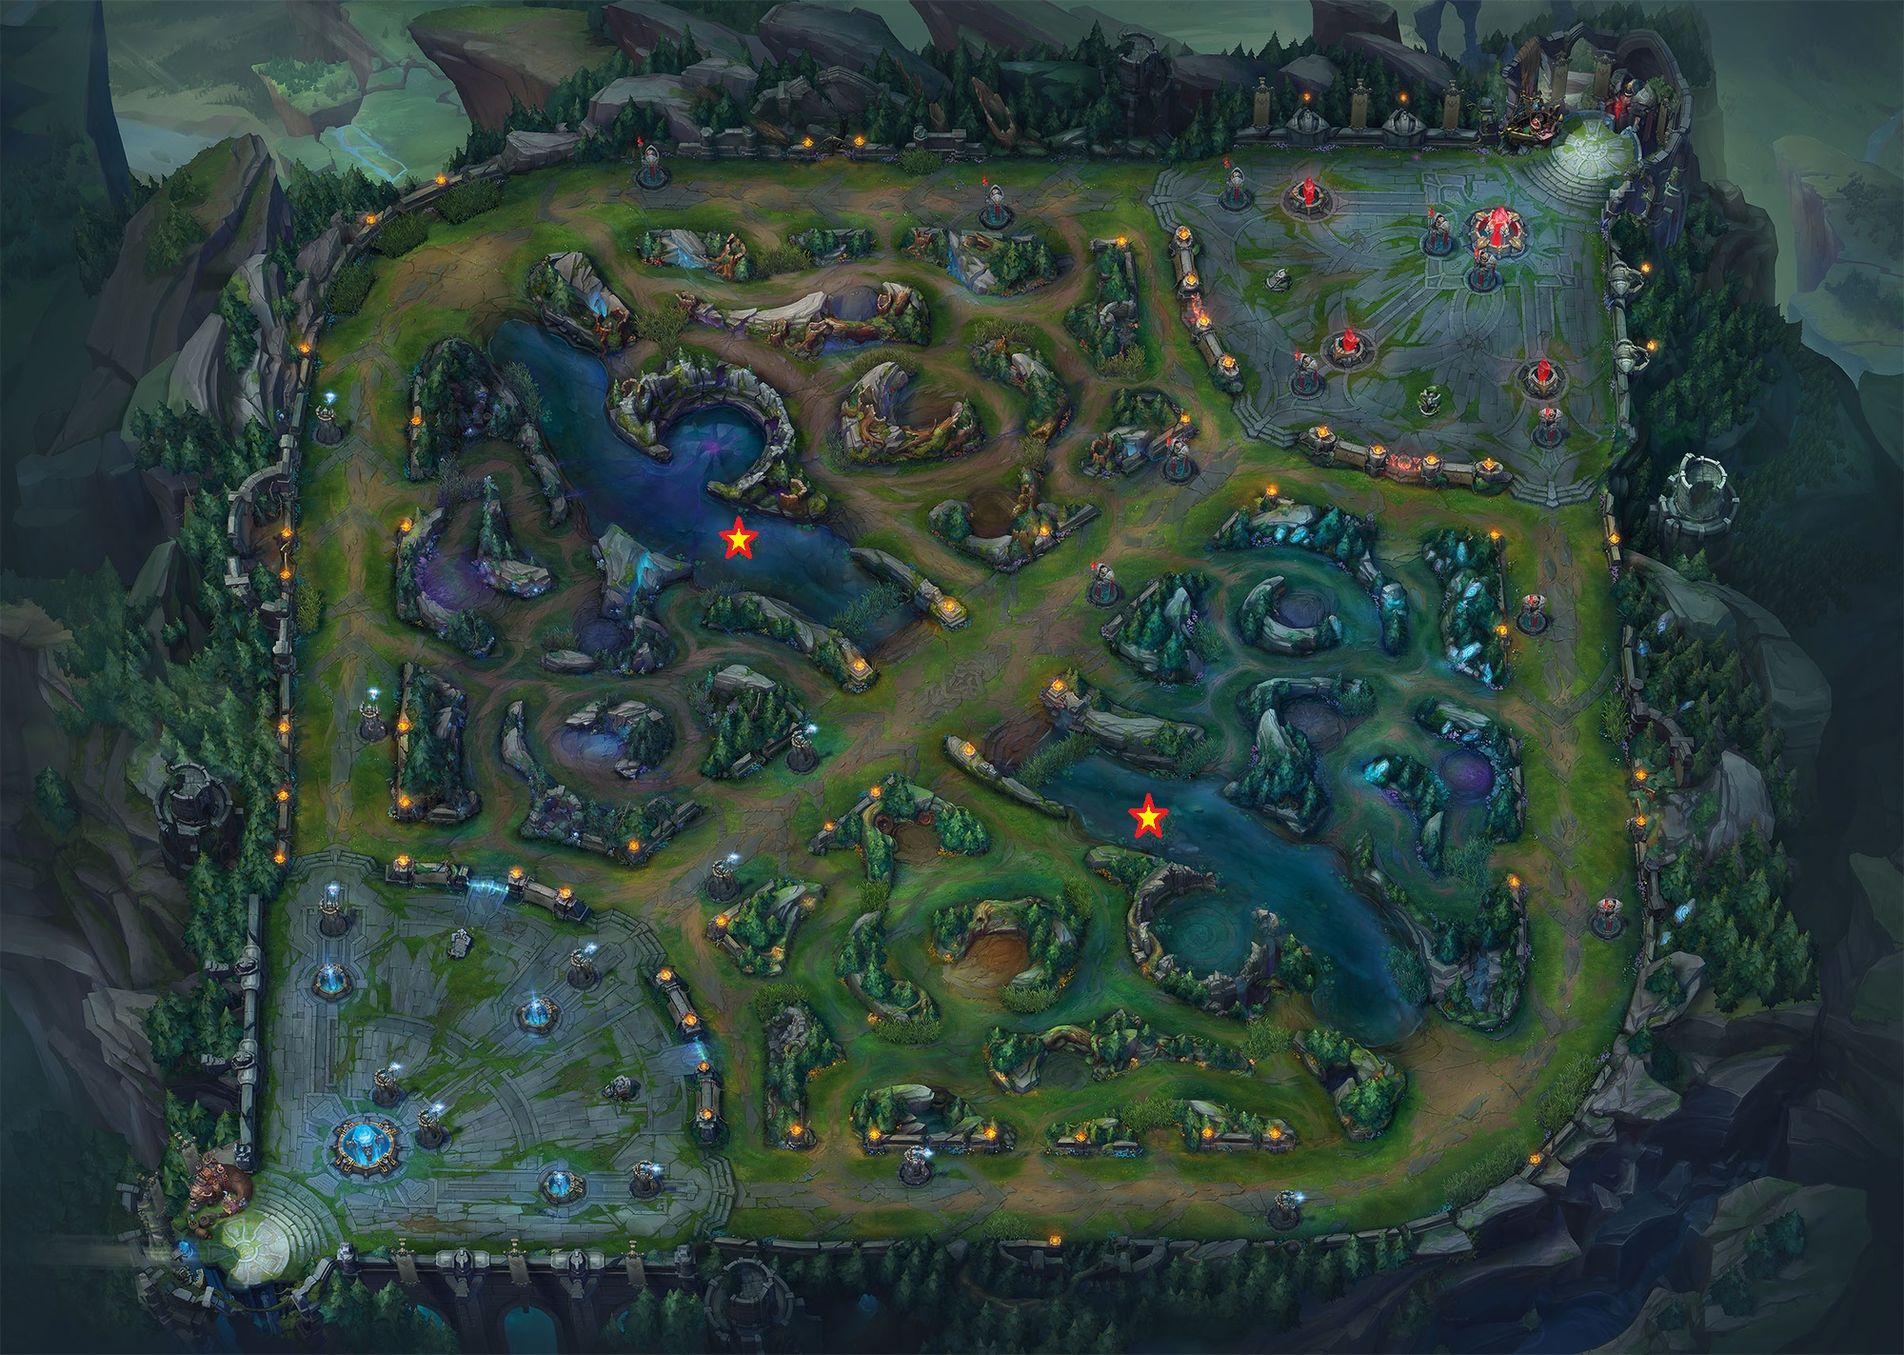 Where to Ward During Laning Phase